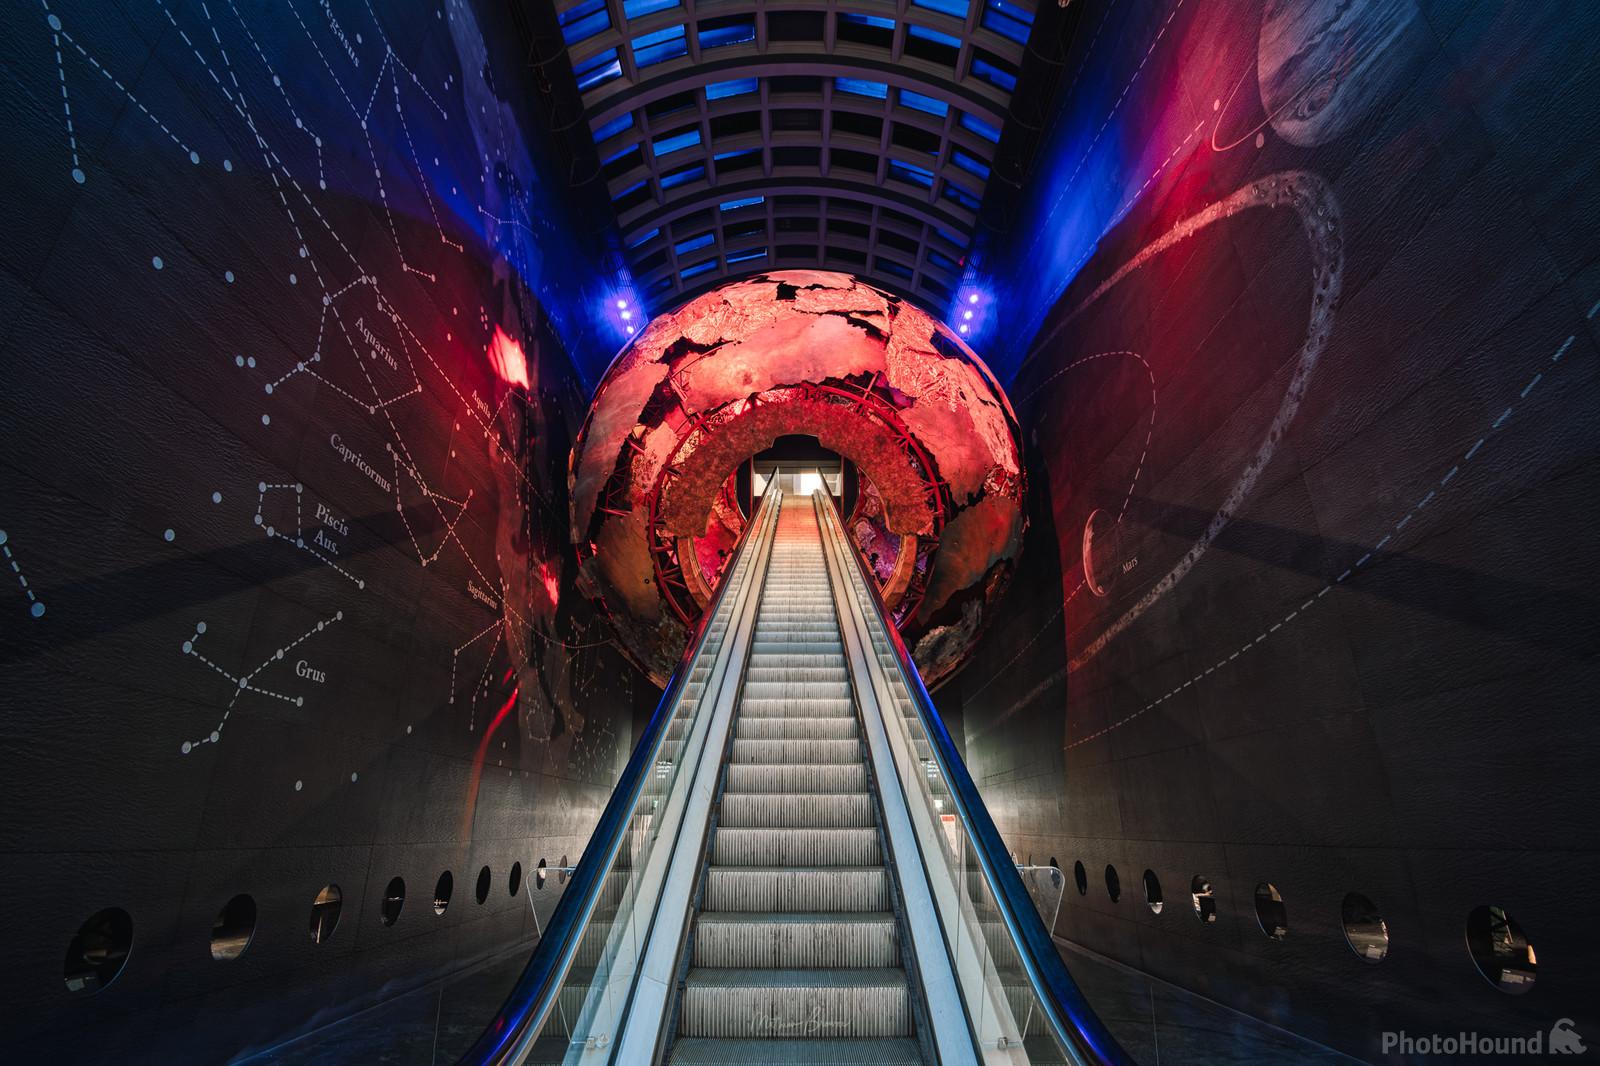 Image of Natural History Museum by Mathew Browne